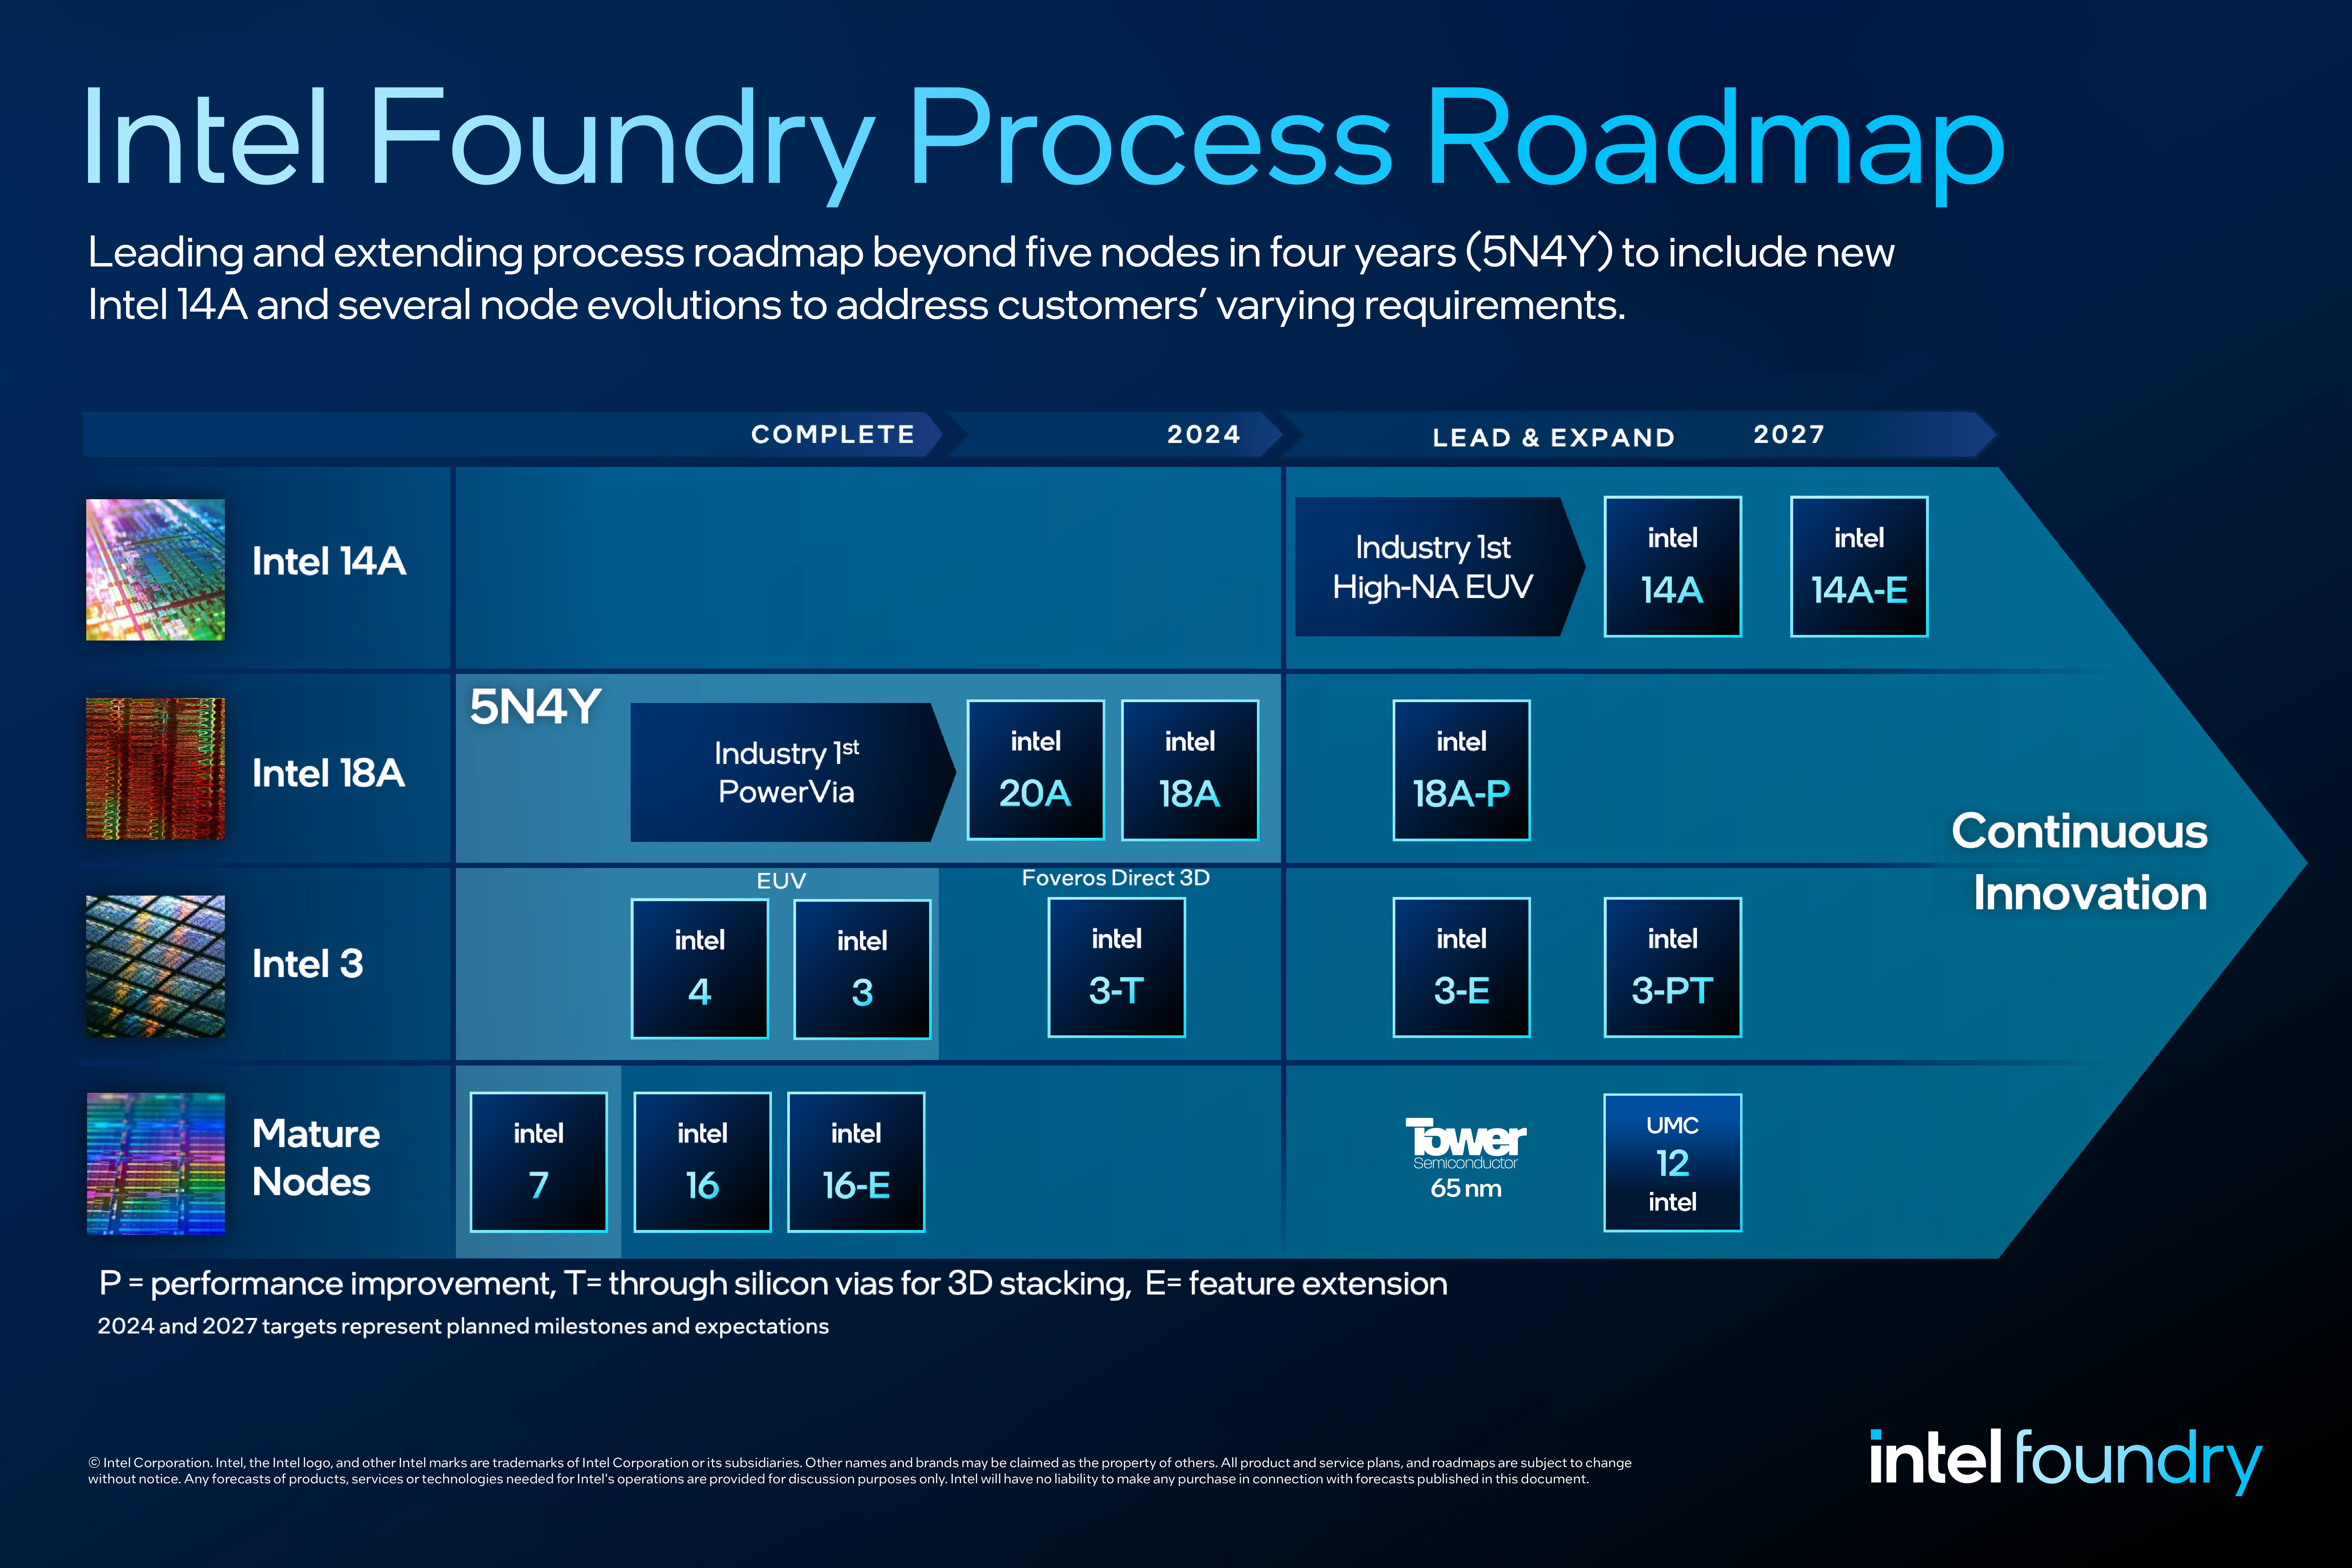 Intel Foundry signs Microsoft as customer for chips made using its Intel 18A process node - US tech giant poised to take process leadership ahead of TSMC and Samsung Foundry